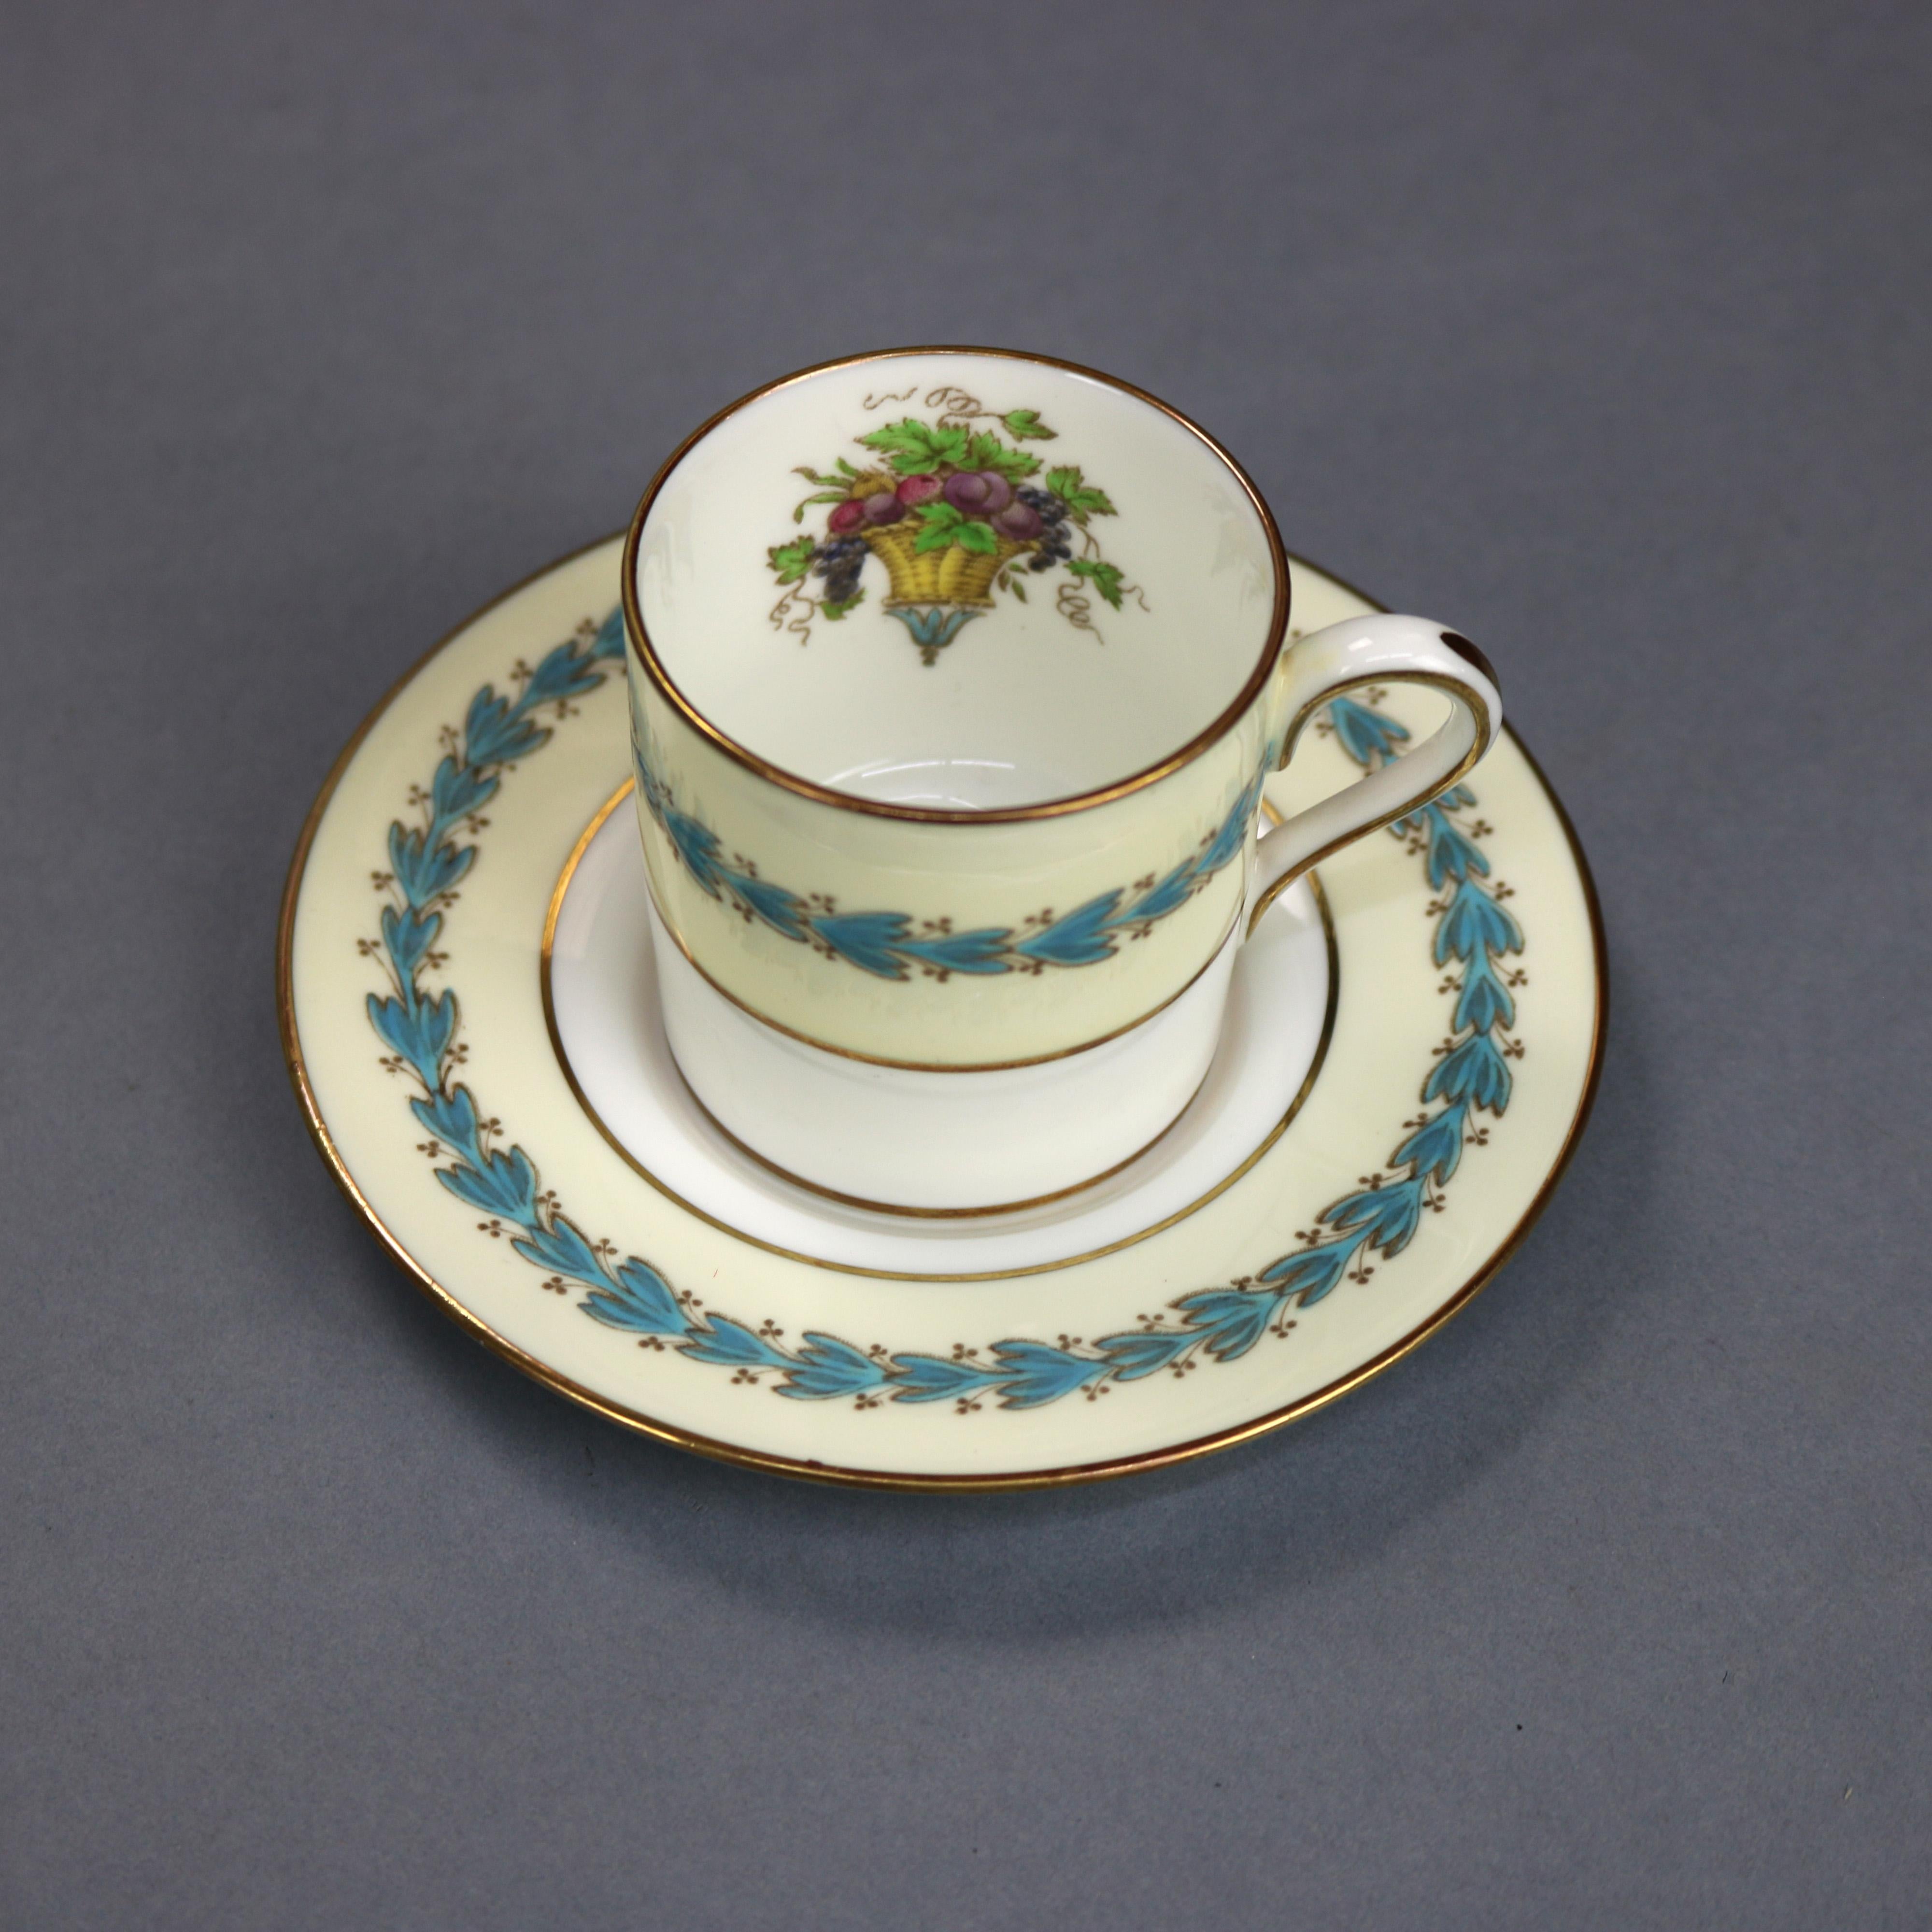 A set of Wedgwood Appledore fine bone china bouillon, demitasse and coffee/tea cups with saucers offer central fruit basket with laurel wreath border, rim with inverted bellflowers, gilt highlights throughout, en verso maker mark as photographed,